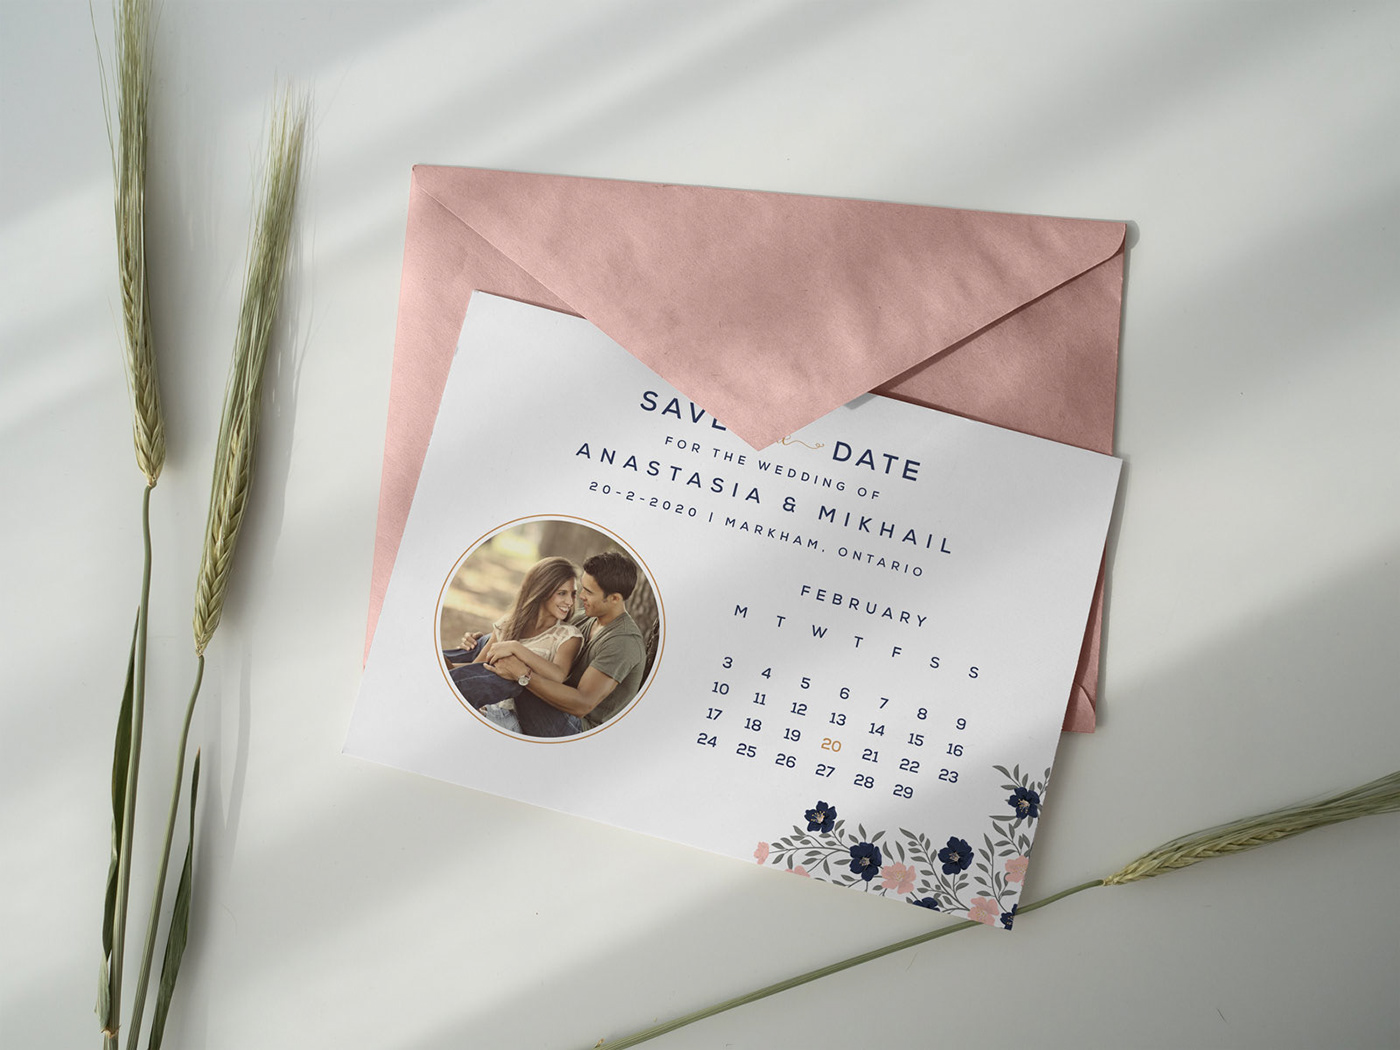 Free Save the Date Postcard Template & Envelope Mockup on Behance Regarding Save The Date Postcards Free Templates